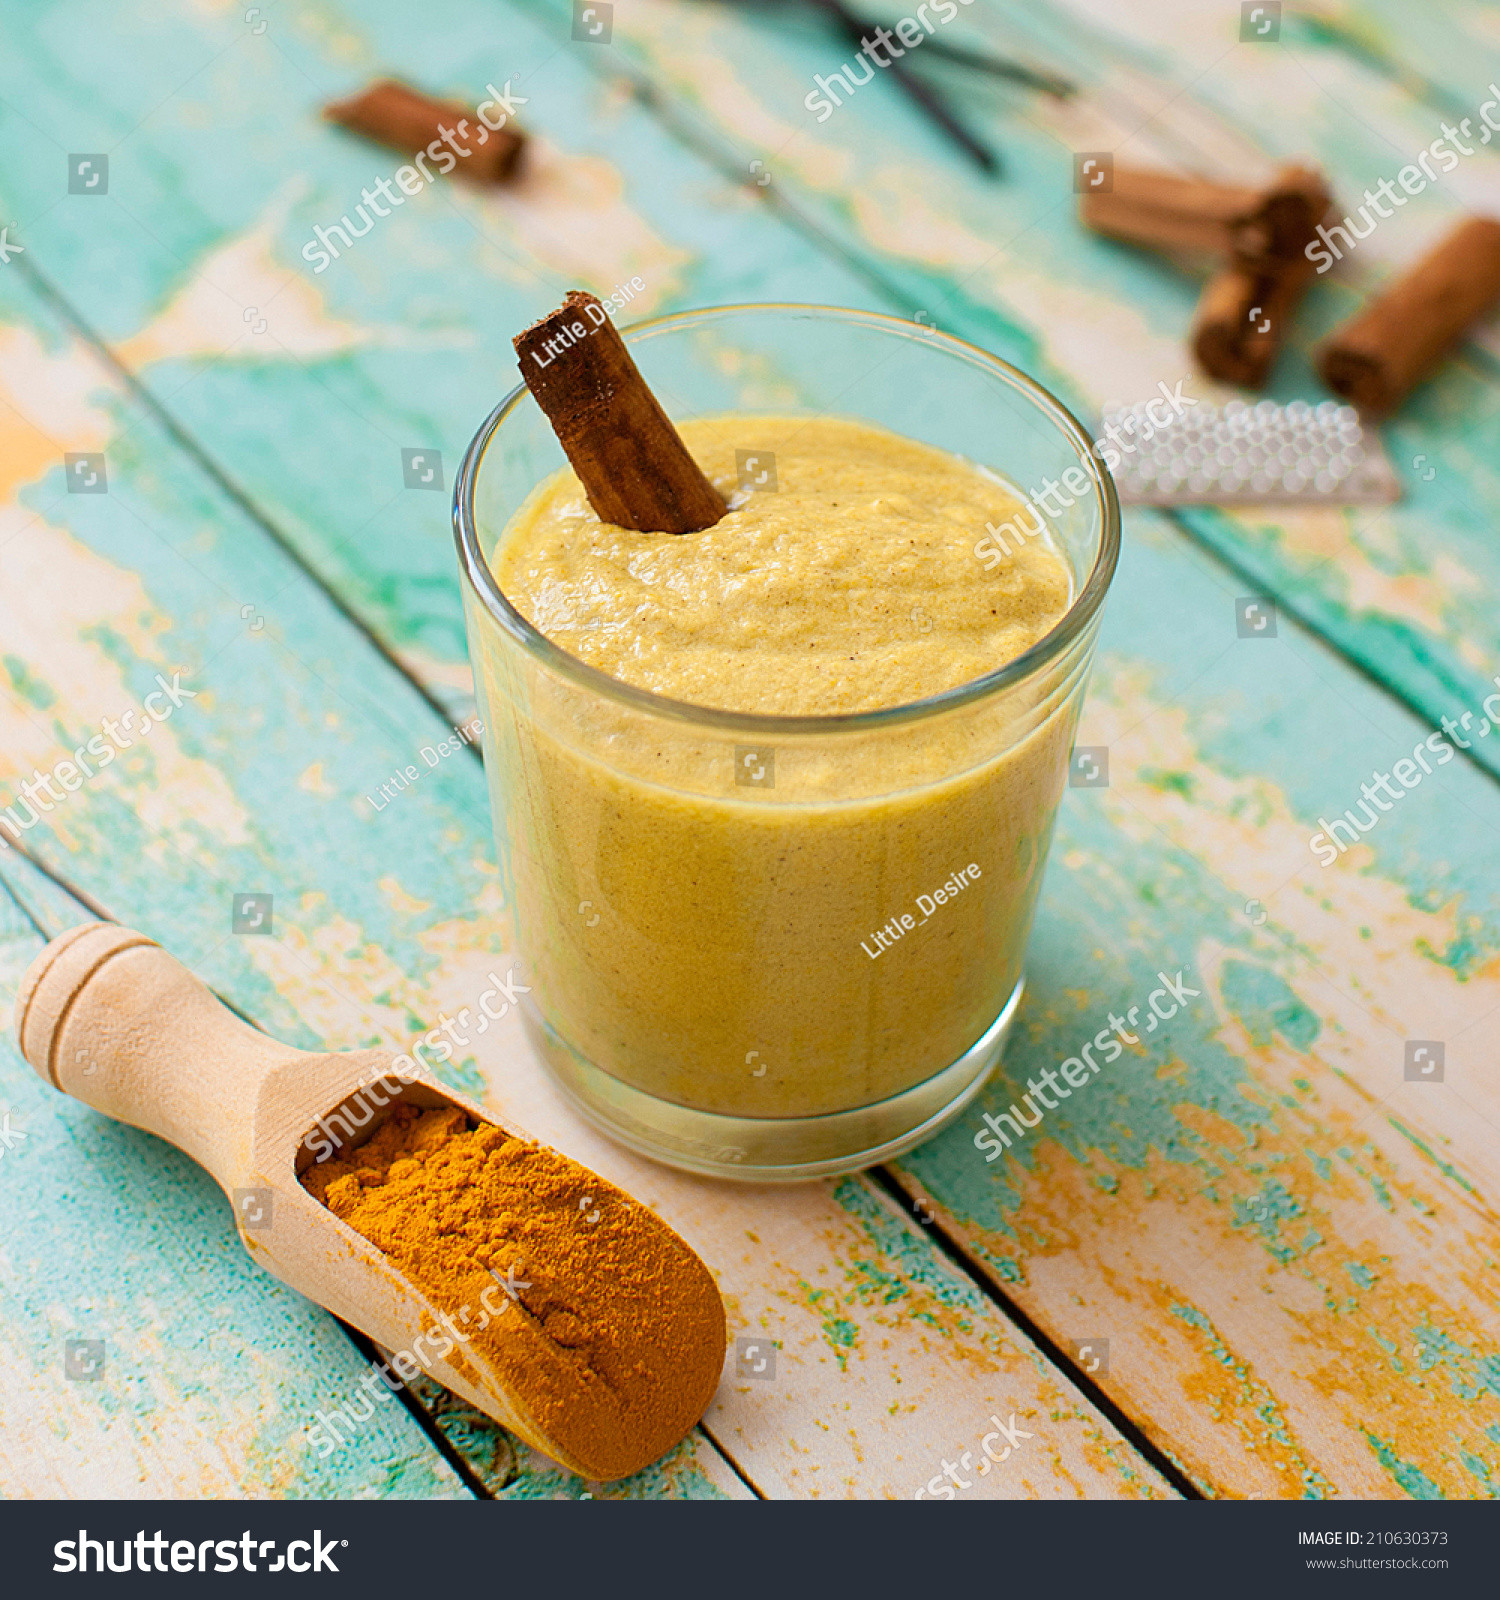 Healthy Smoothies With Coconut Milk
 Healthy Smoothie With Turmeric Vanilla Cinnamon And